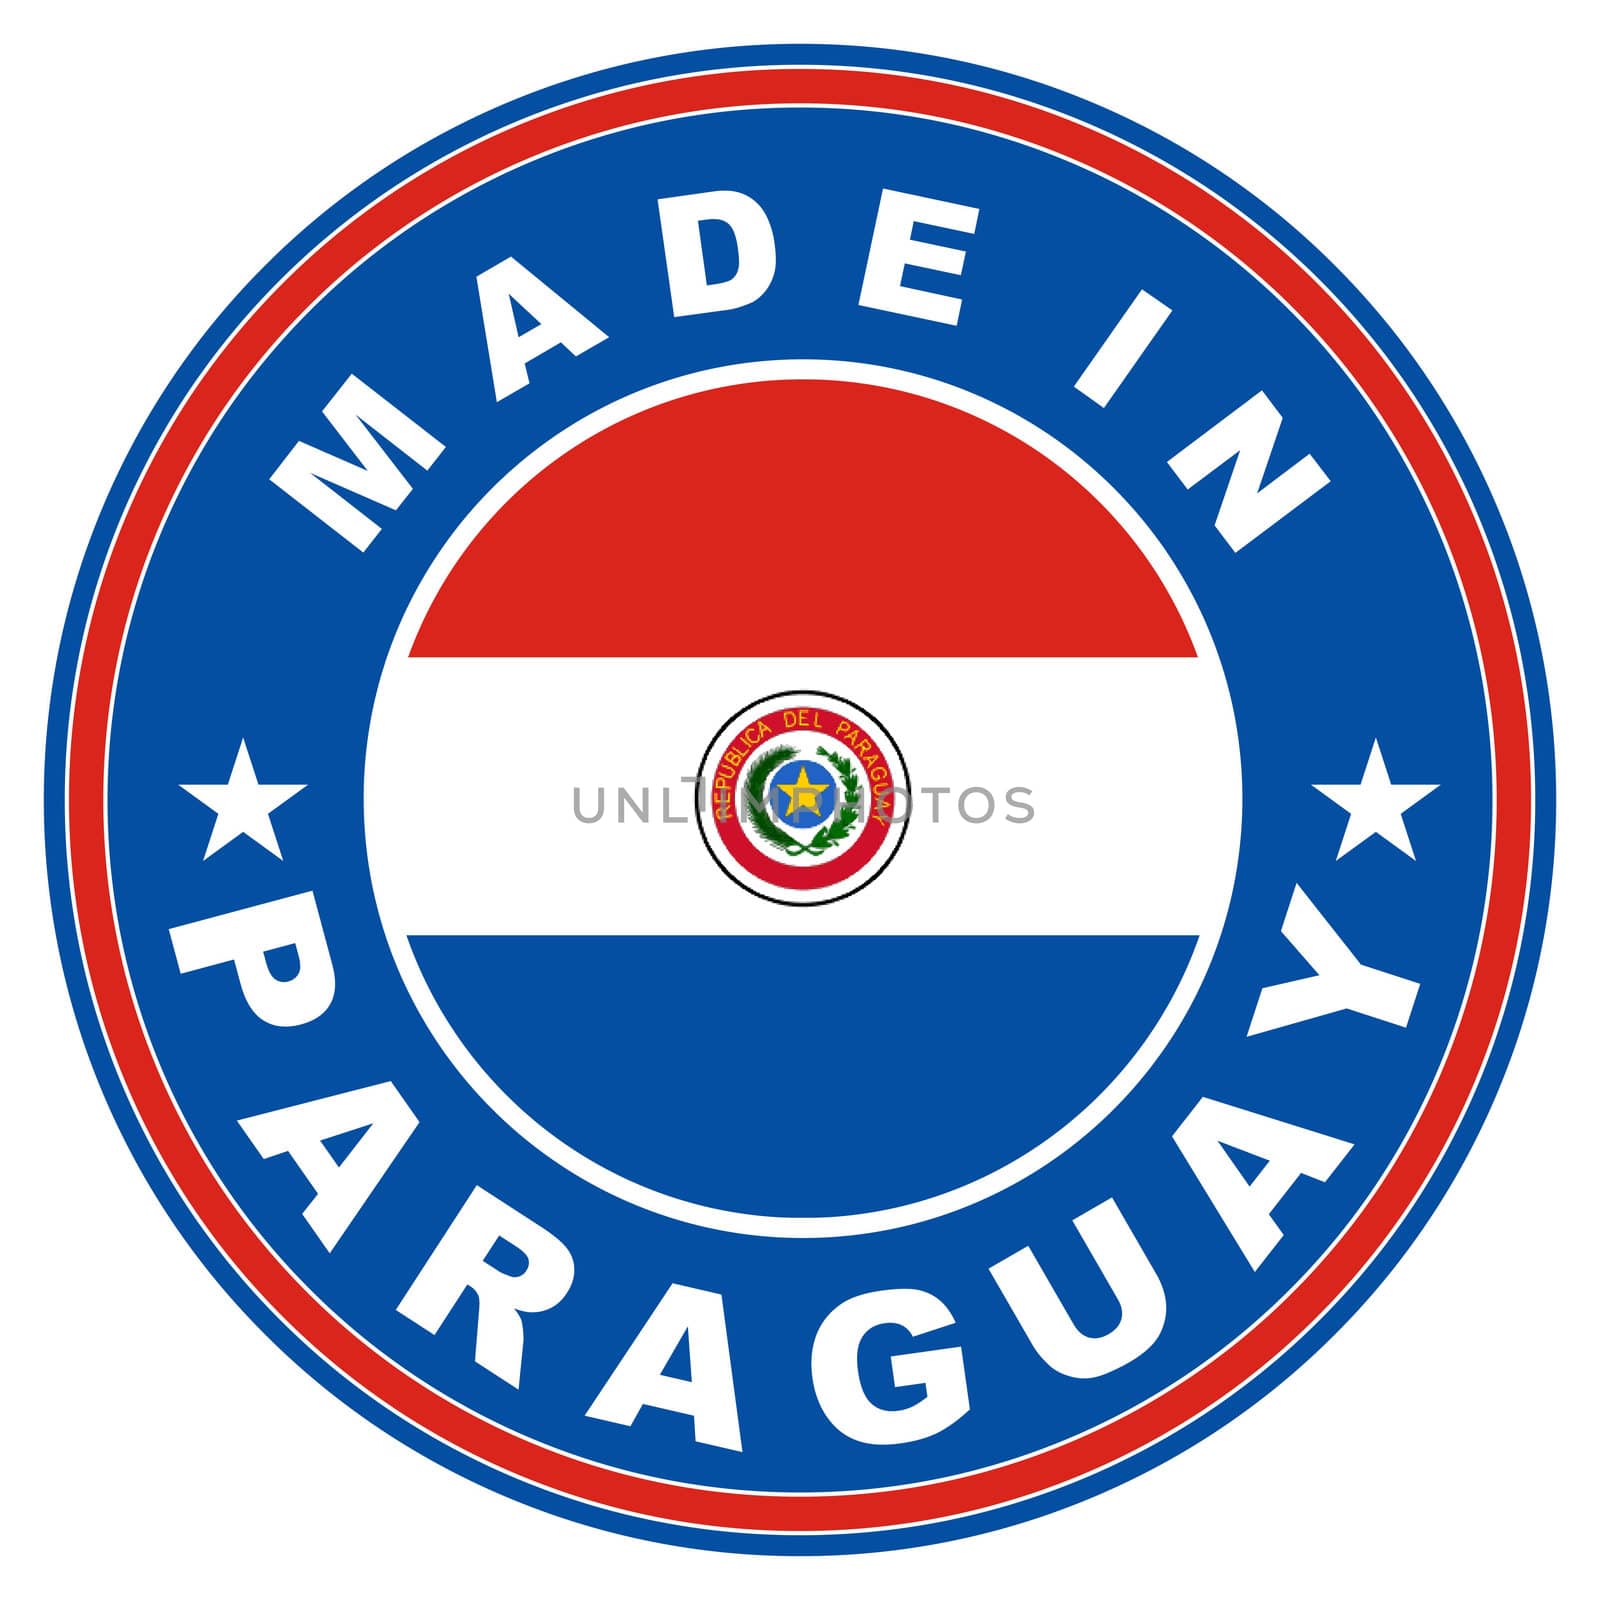 made in paraguay by tony4urban